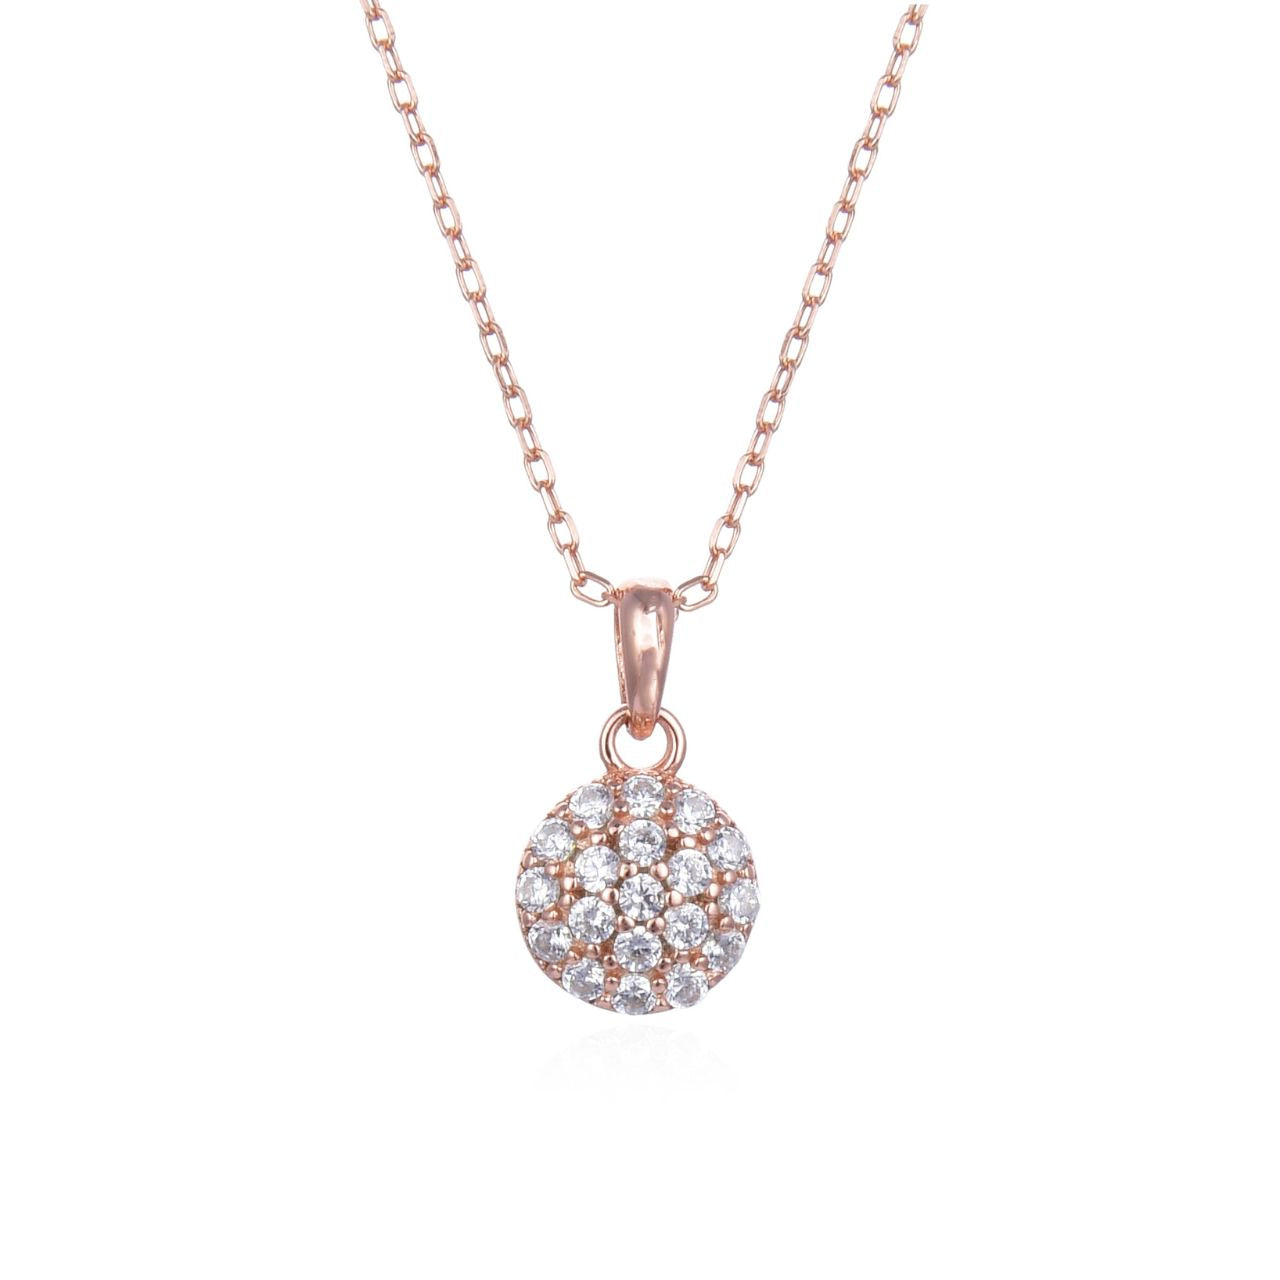 Rose Gold Diamante Necklace  Rose gold plated sterling silver necklace with cubic zirconia stones. Highlight your beauty with some extra sparkle.